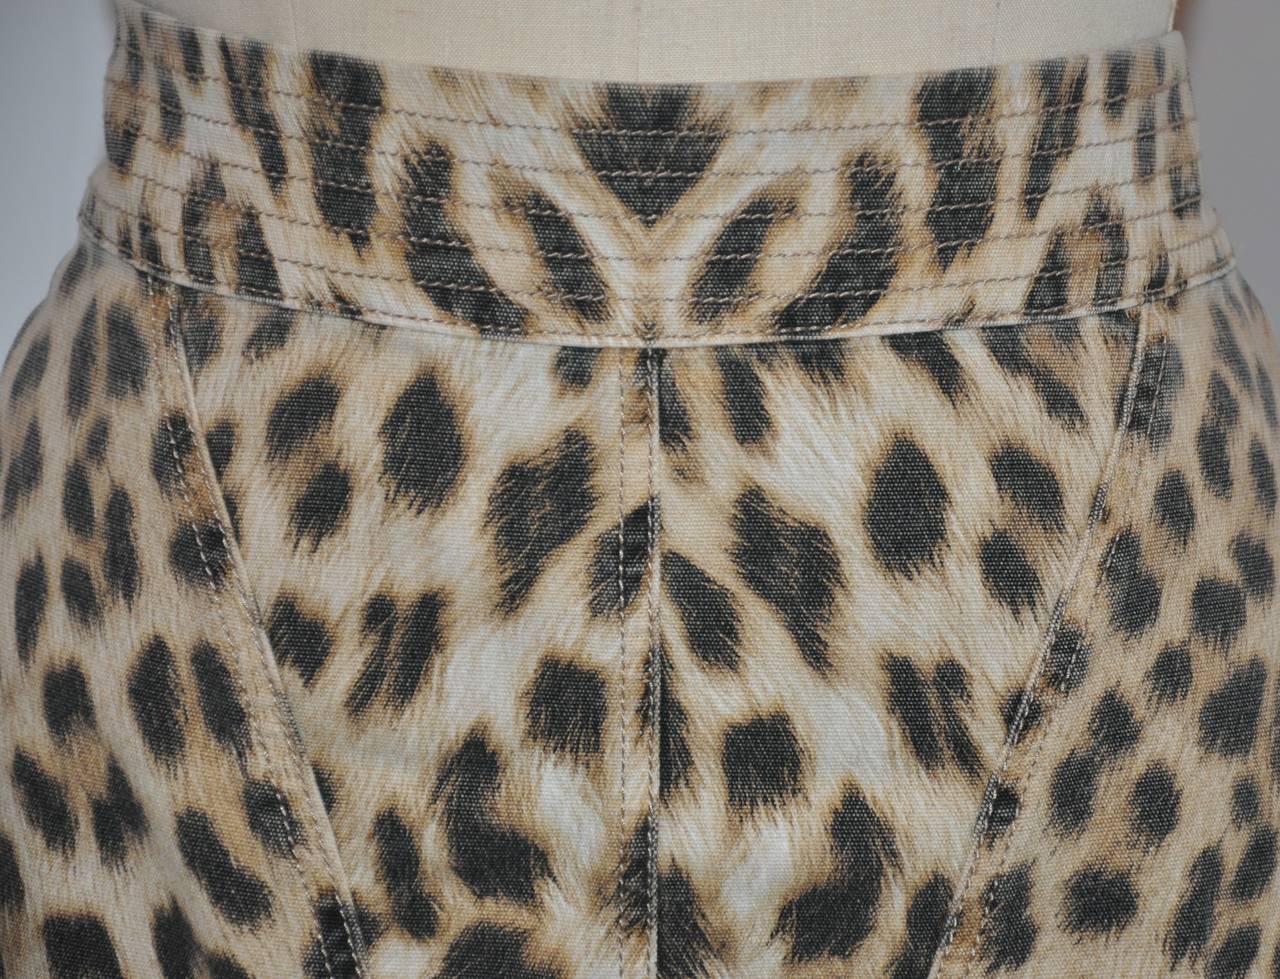 Roberto Cavalli leopard print cotton skirt is detailed with gold hardware center-back zipper which measures 6